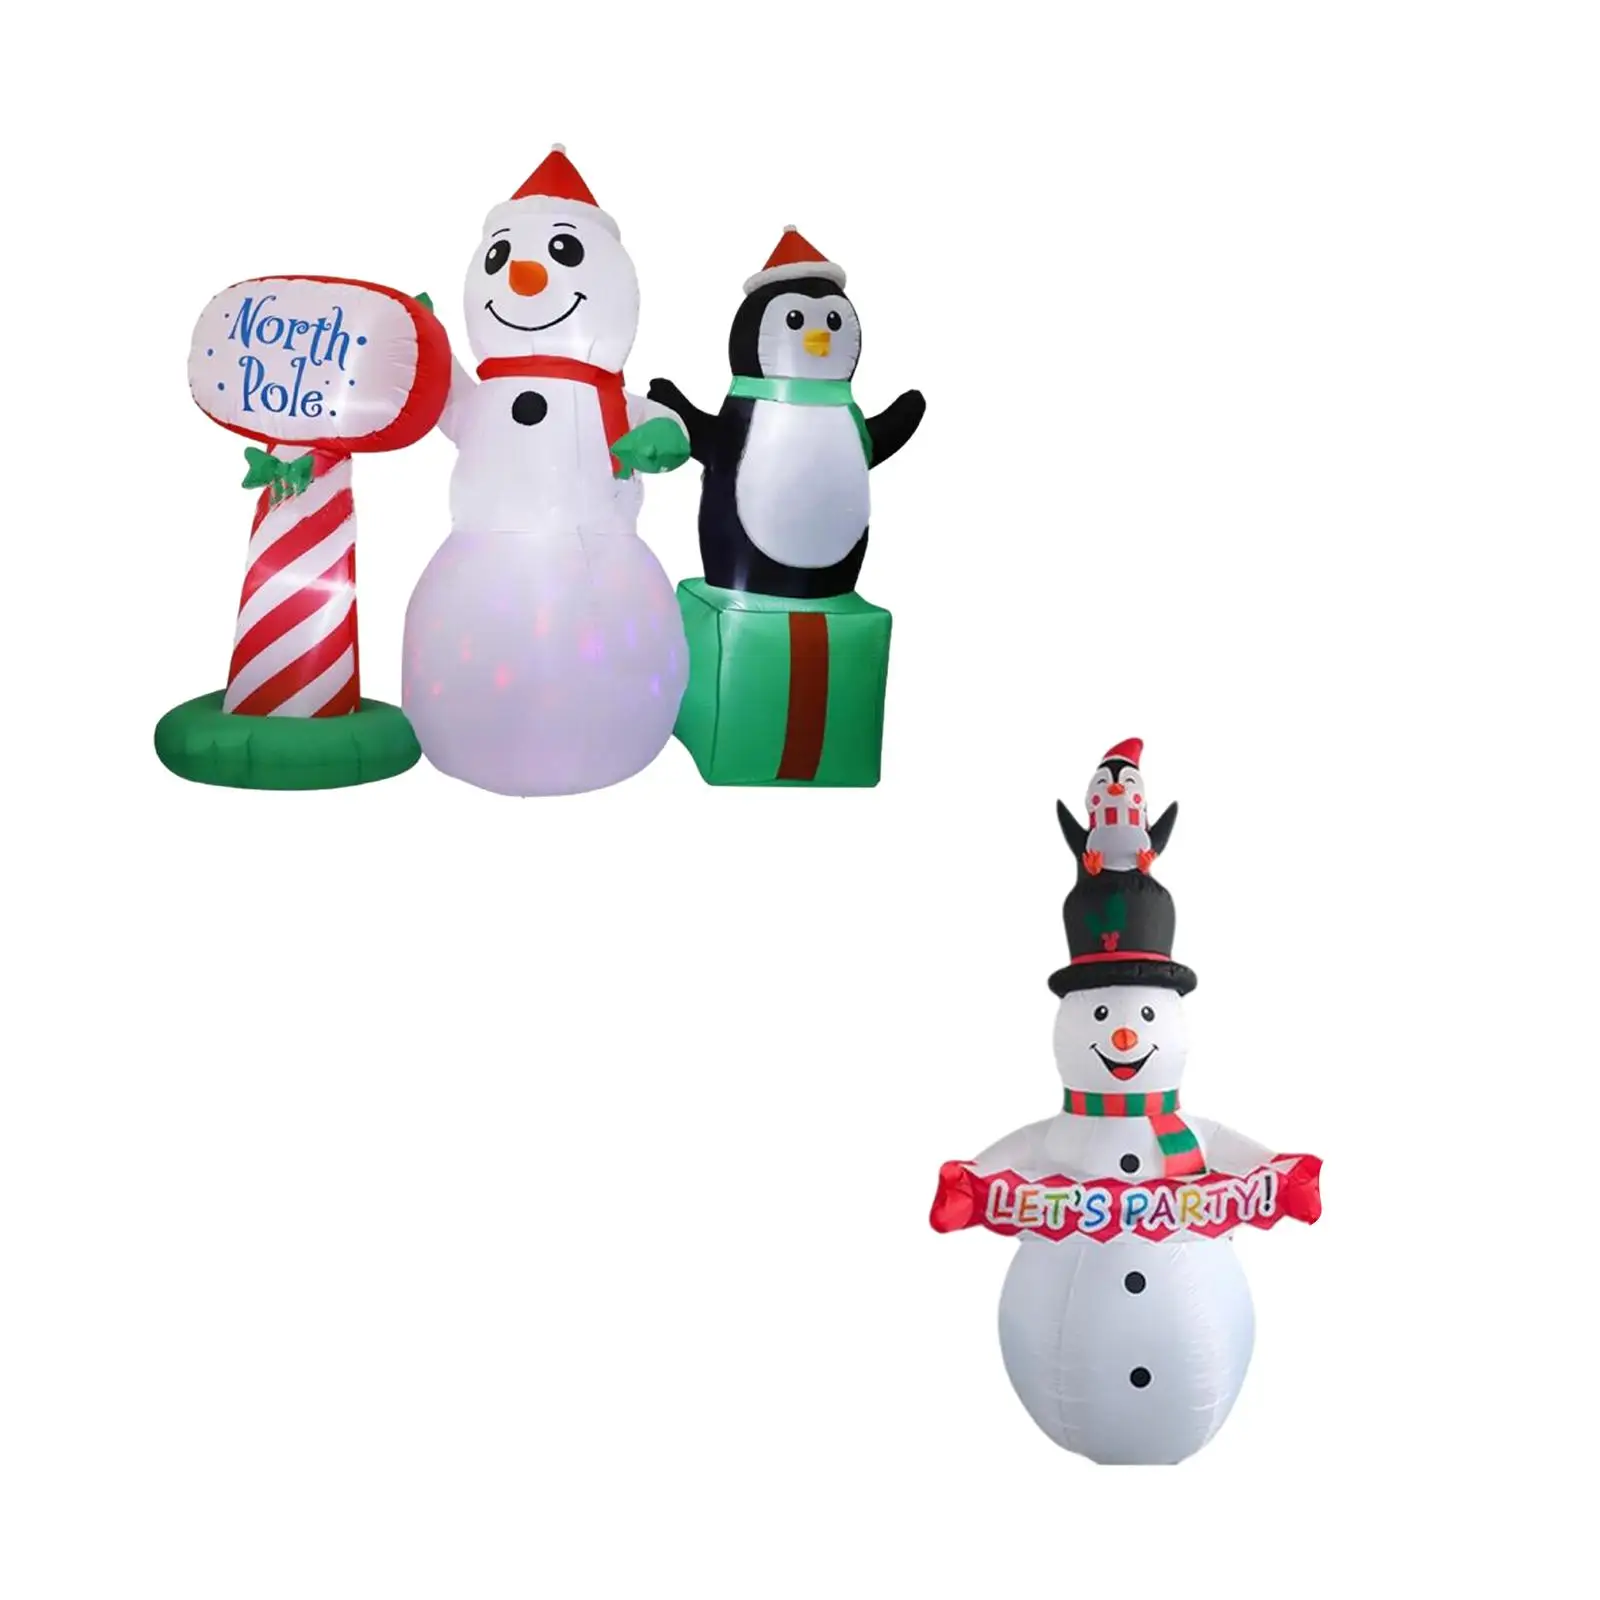 Blow up Snow Man Funny Weatherproof Christmas Decor for Holiday Party Lawn